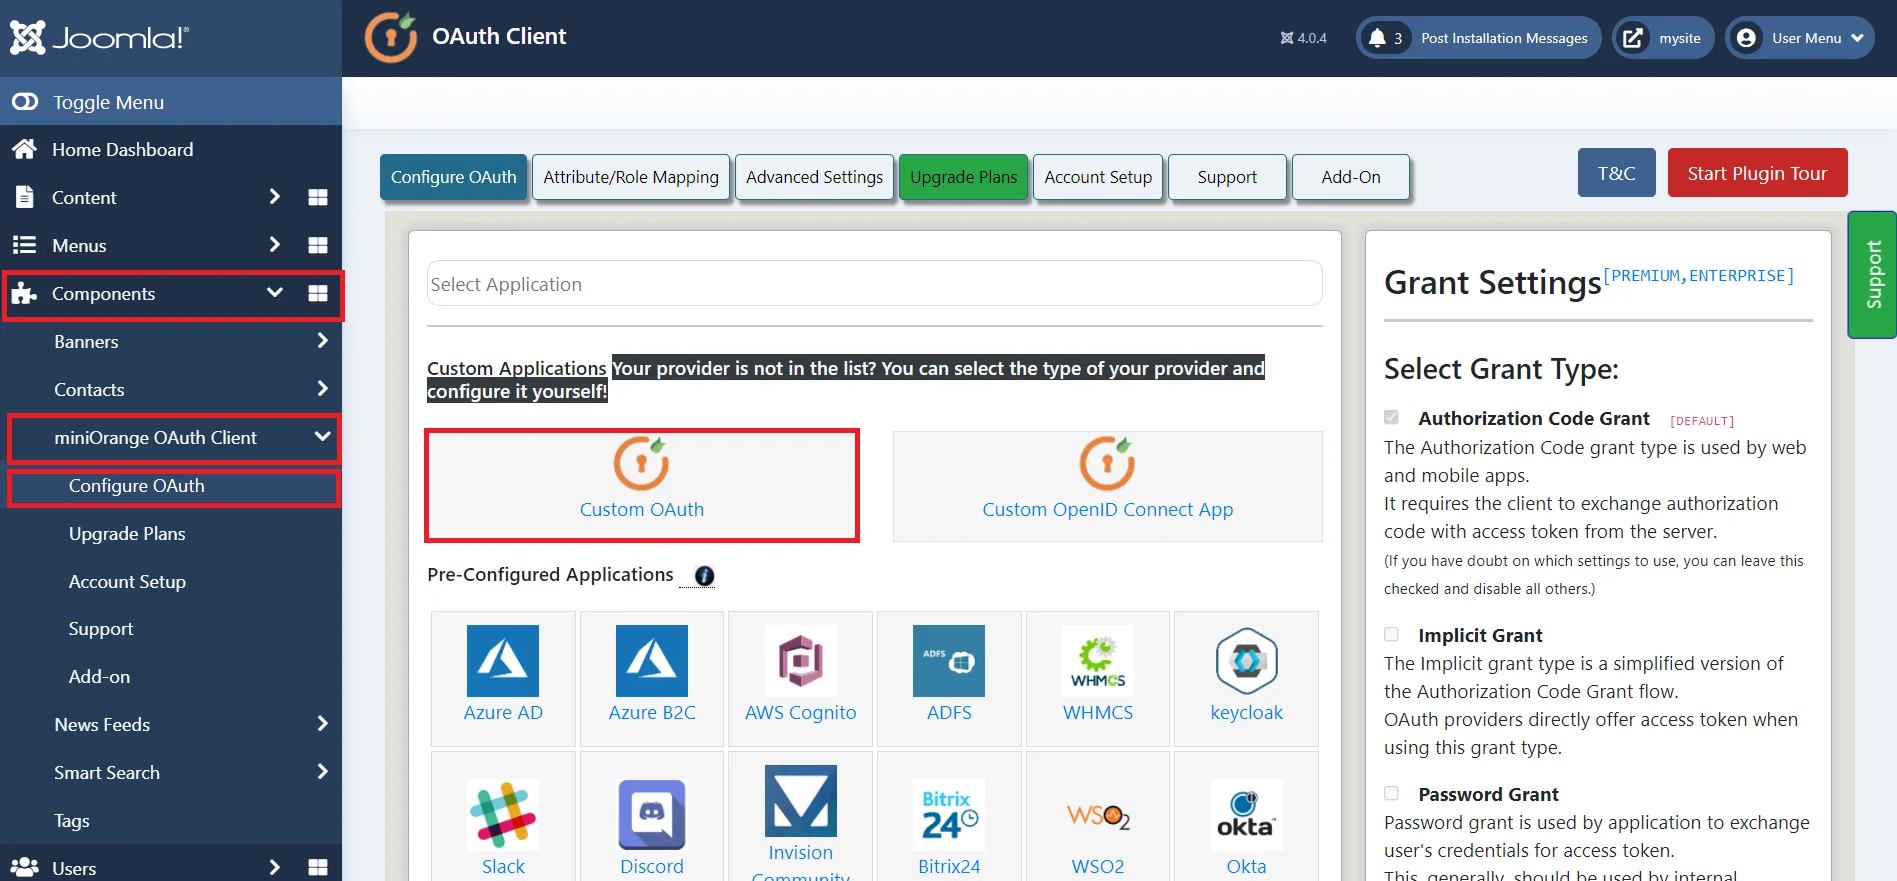  ClassLink Oauth / OpenID Connect Single Sign-on SSO for Joomla - App Client Configuration